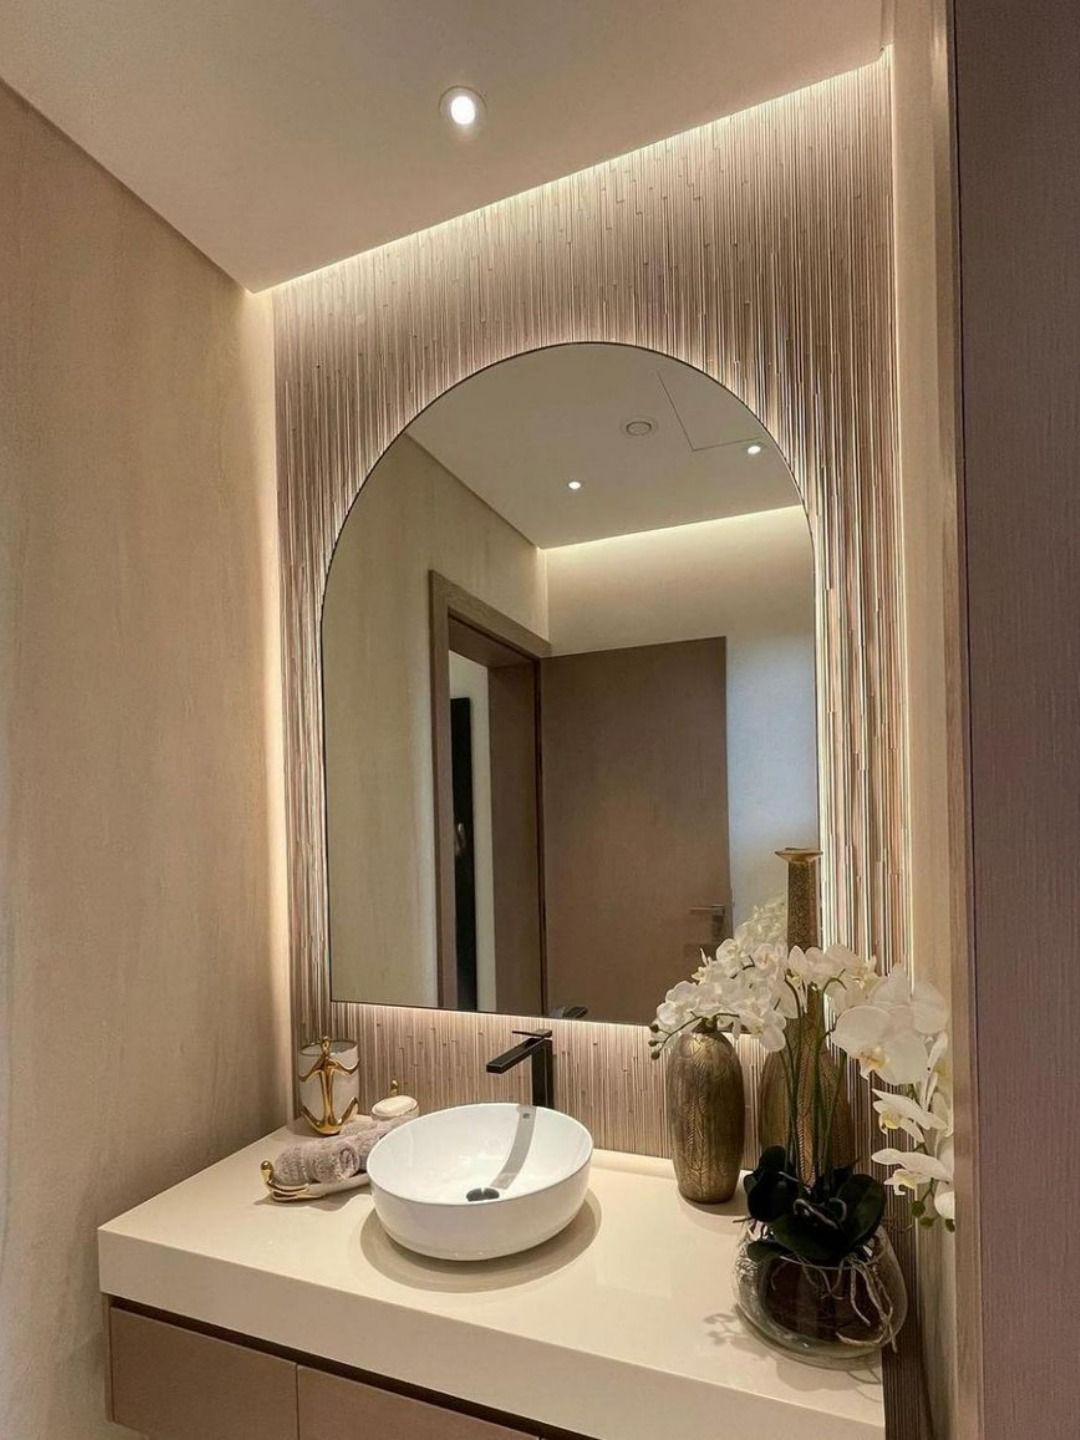 Boost ambiance with bathroom mirror
lights